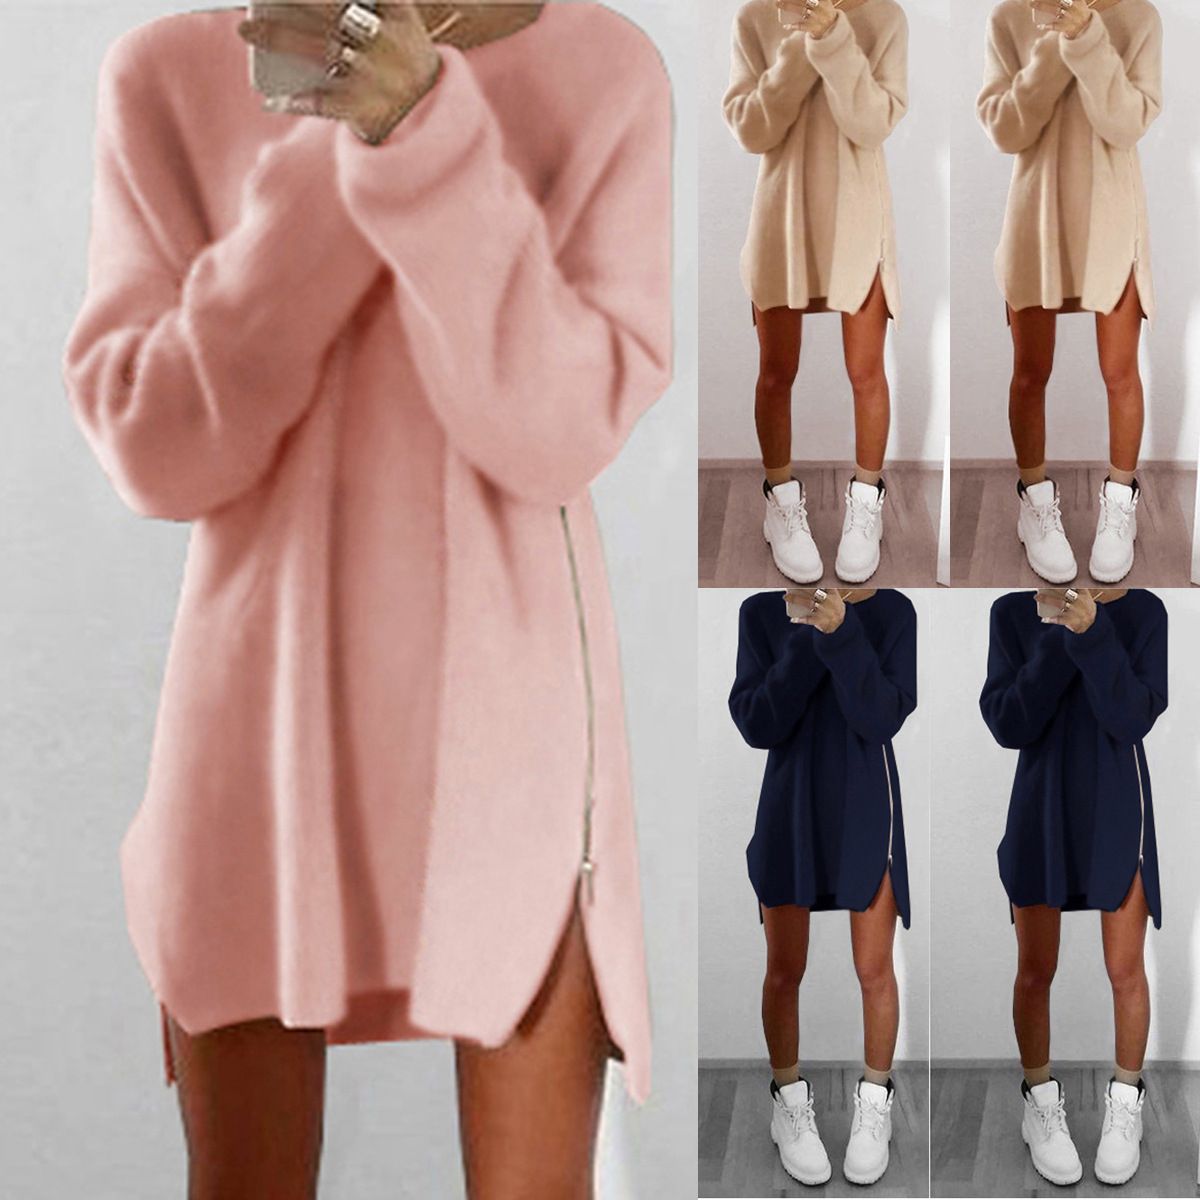 Womens Long Sleeve Jumper Ladies Knitted Sweater Loose Tunic Top Mini Dresses